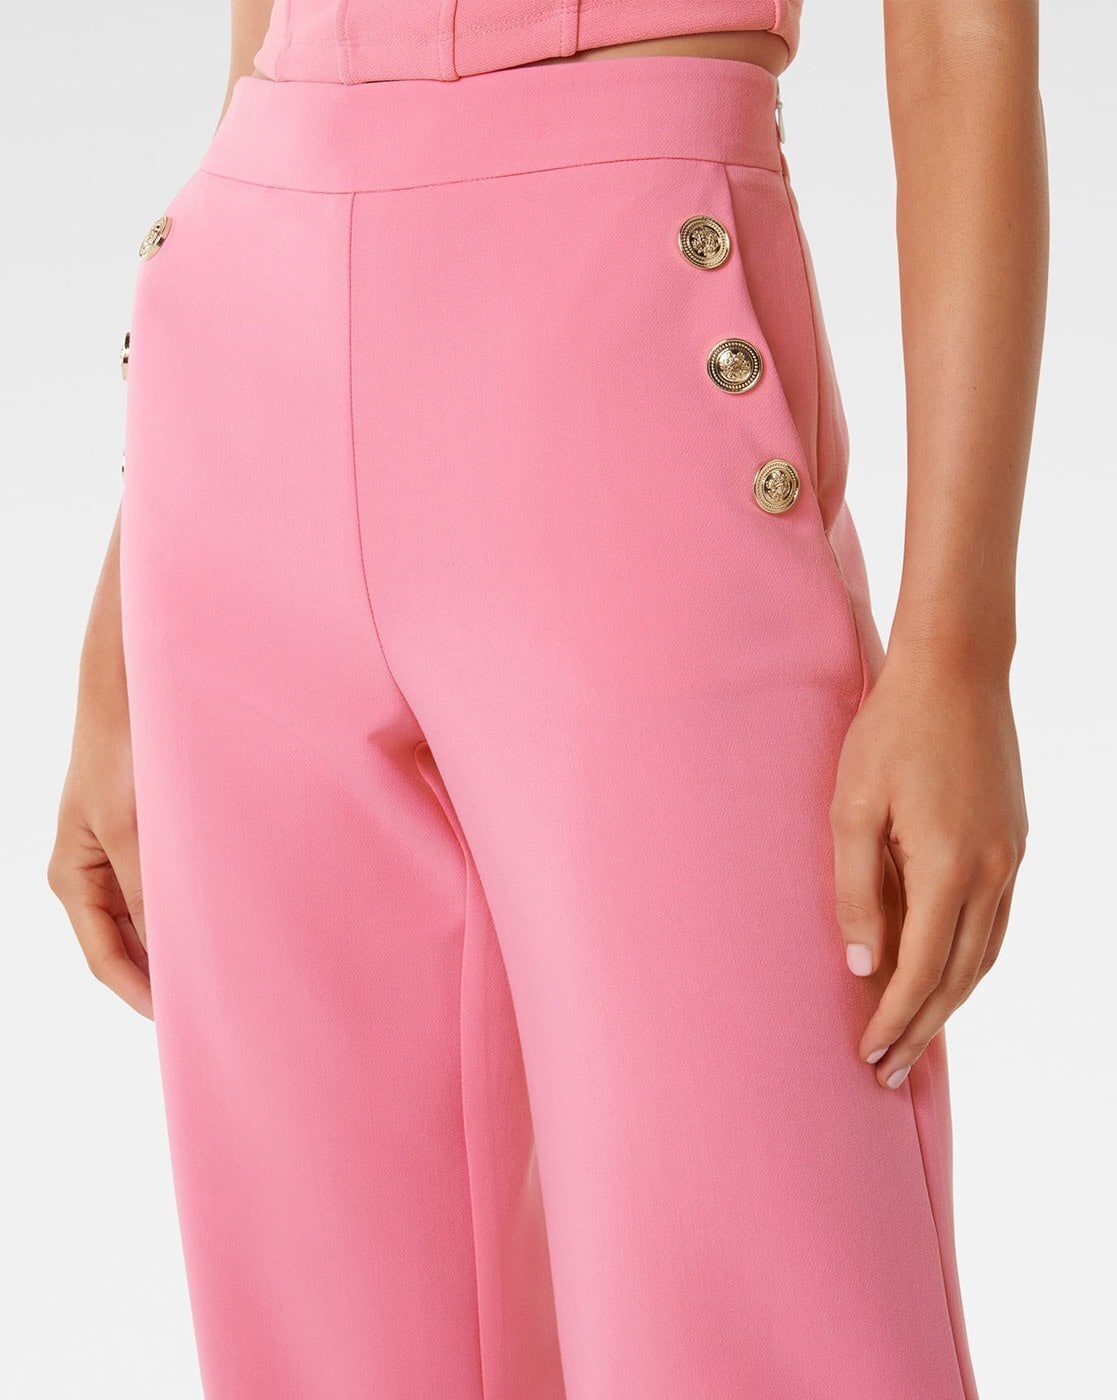 River Island pleated tapered peg trouser in bright pink | ASOS